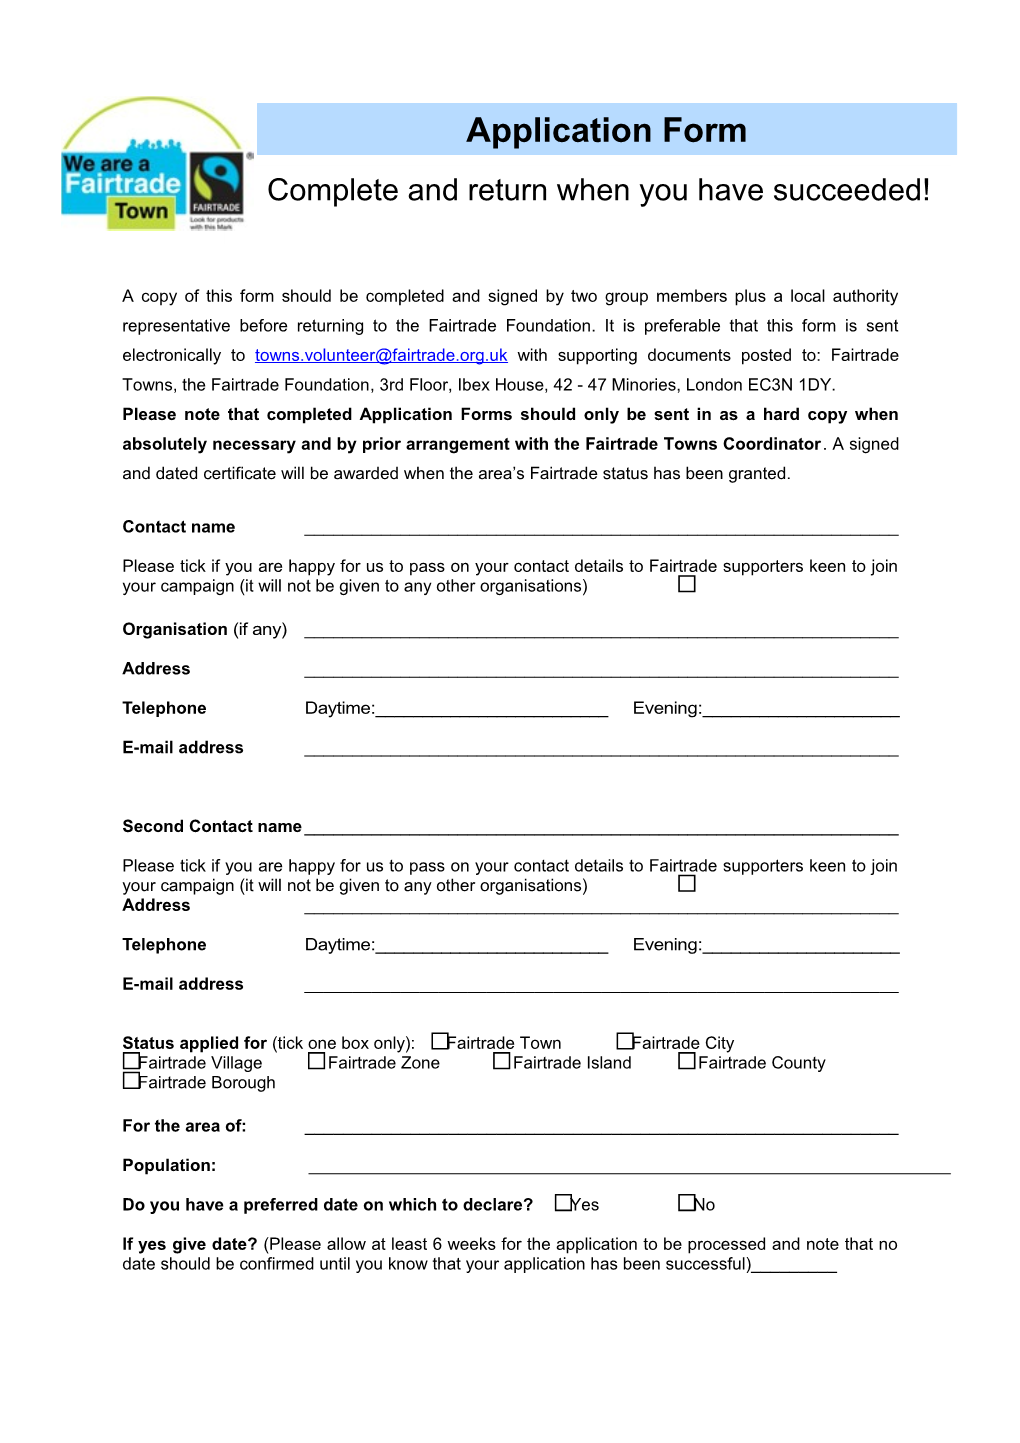 A Copy of This Form Should Be Completed and Signed by Two Group Members Plus a Local Authority